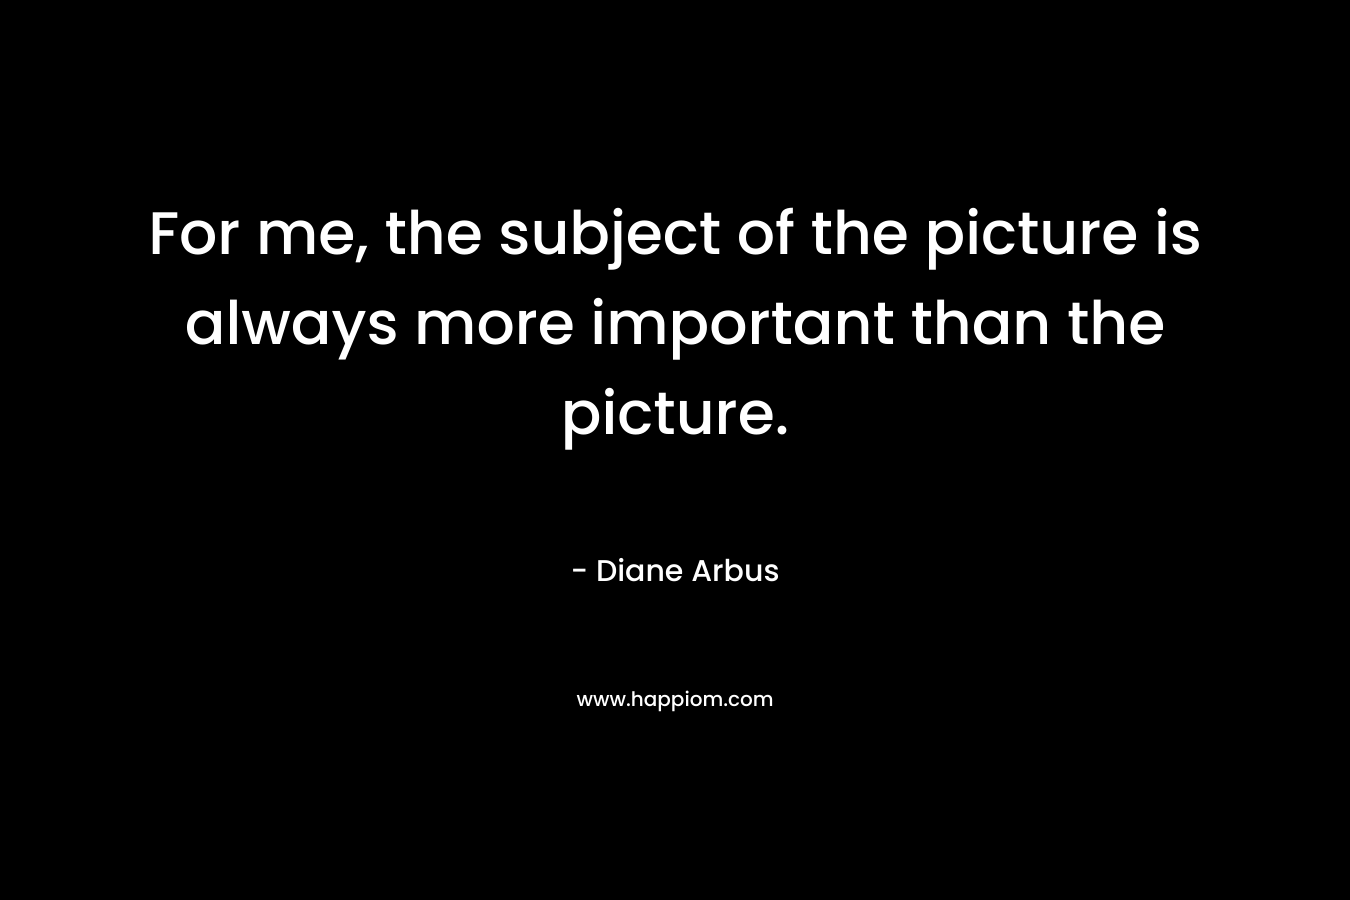 For me, the subject of the picture is always more important than the picture. – Diane Arbus